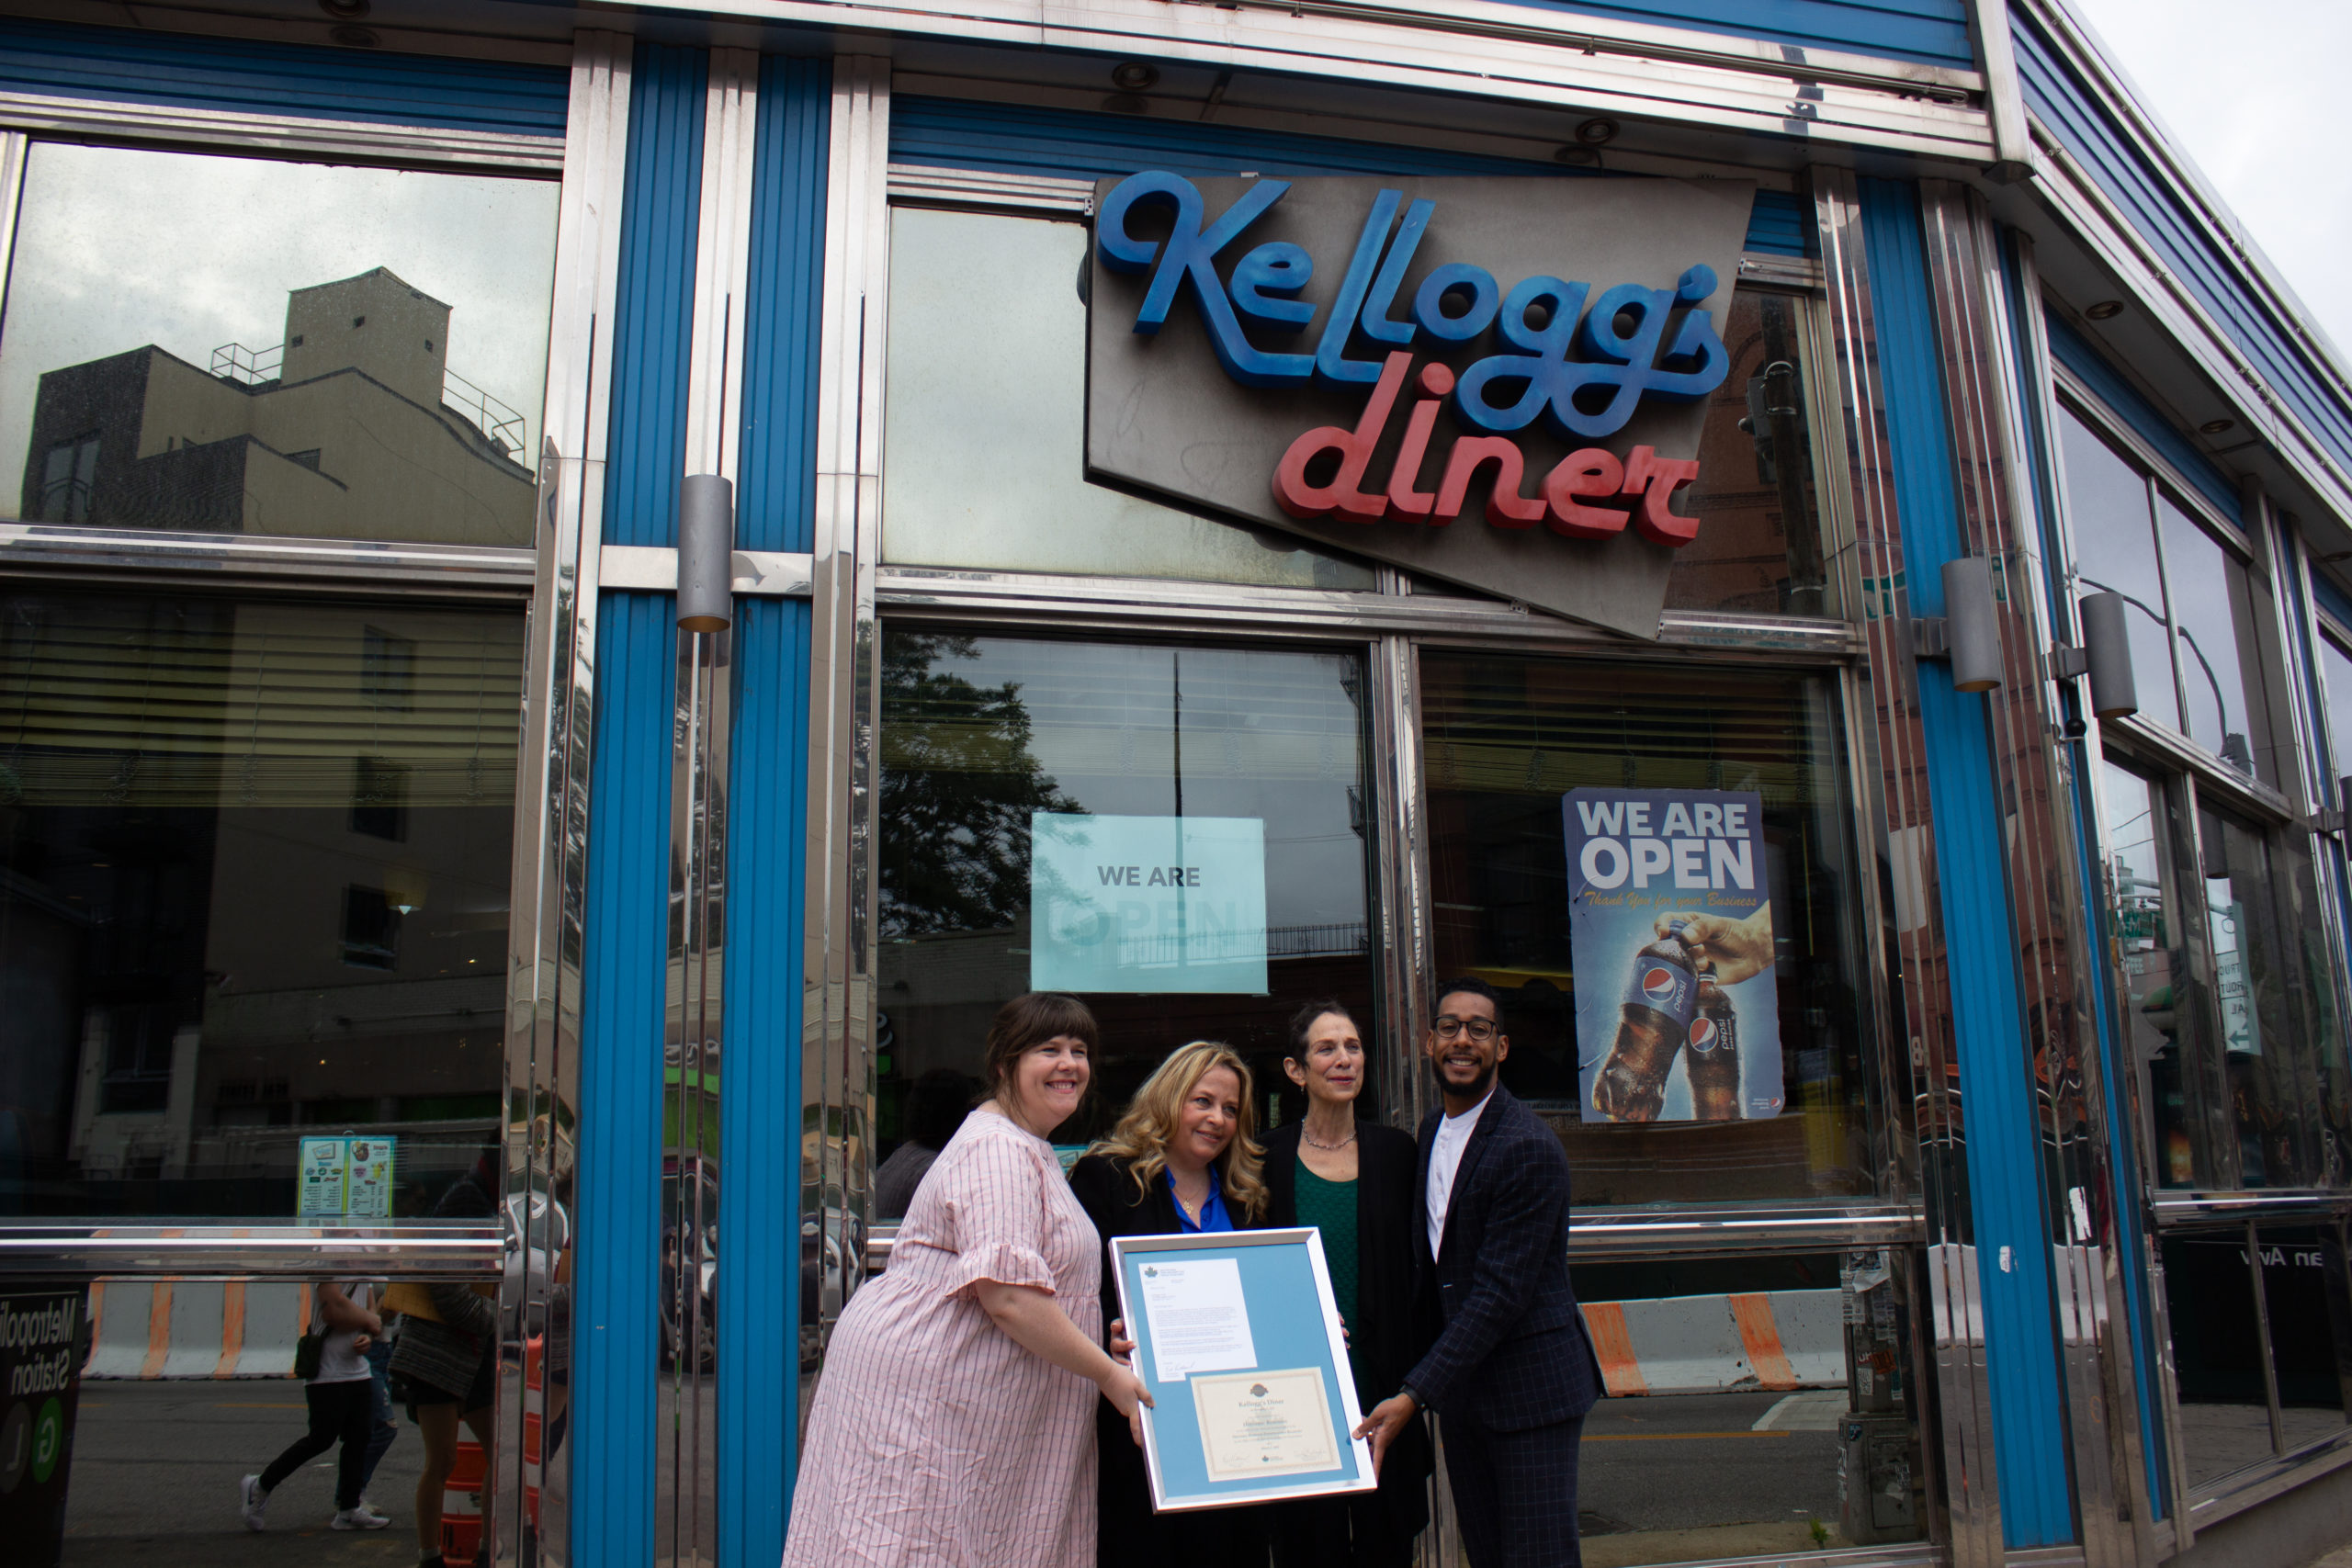 Exclusive: Kellogg’s added to historic registry